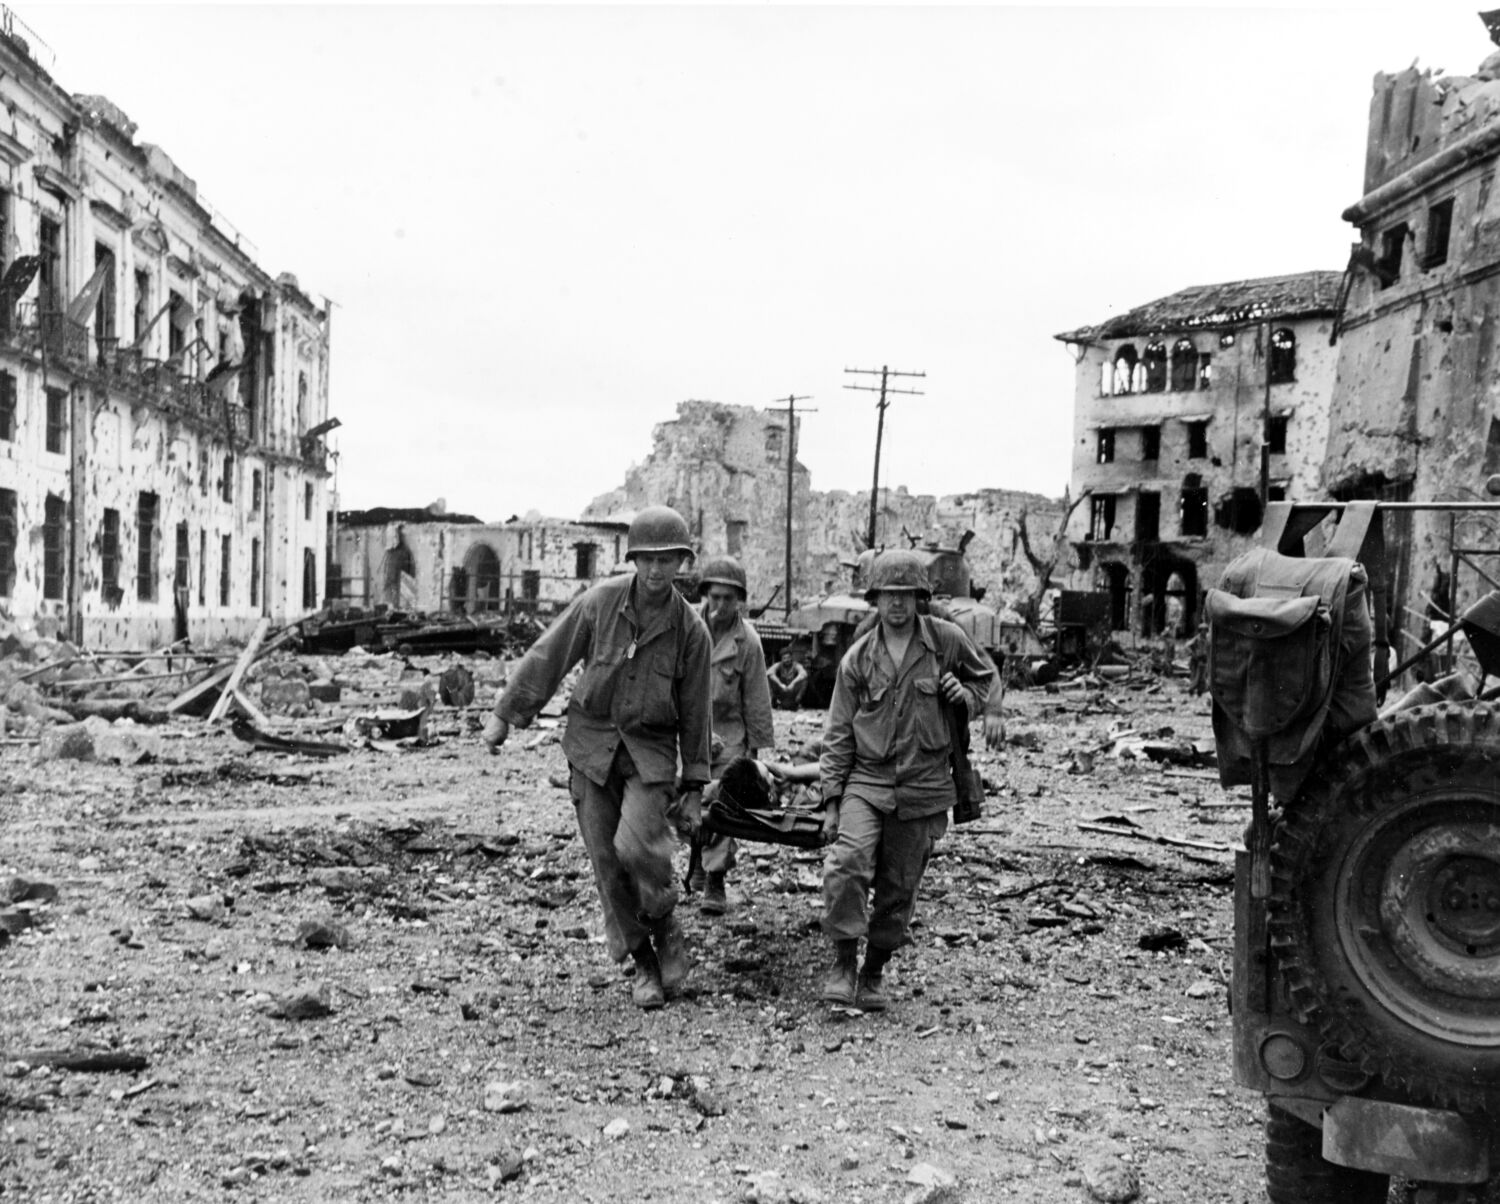 This city was ravaged in WWII. Why do few remember the suffering and sacrifice?